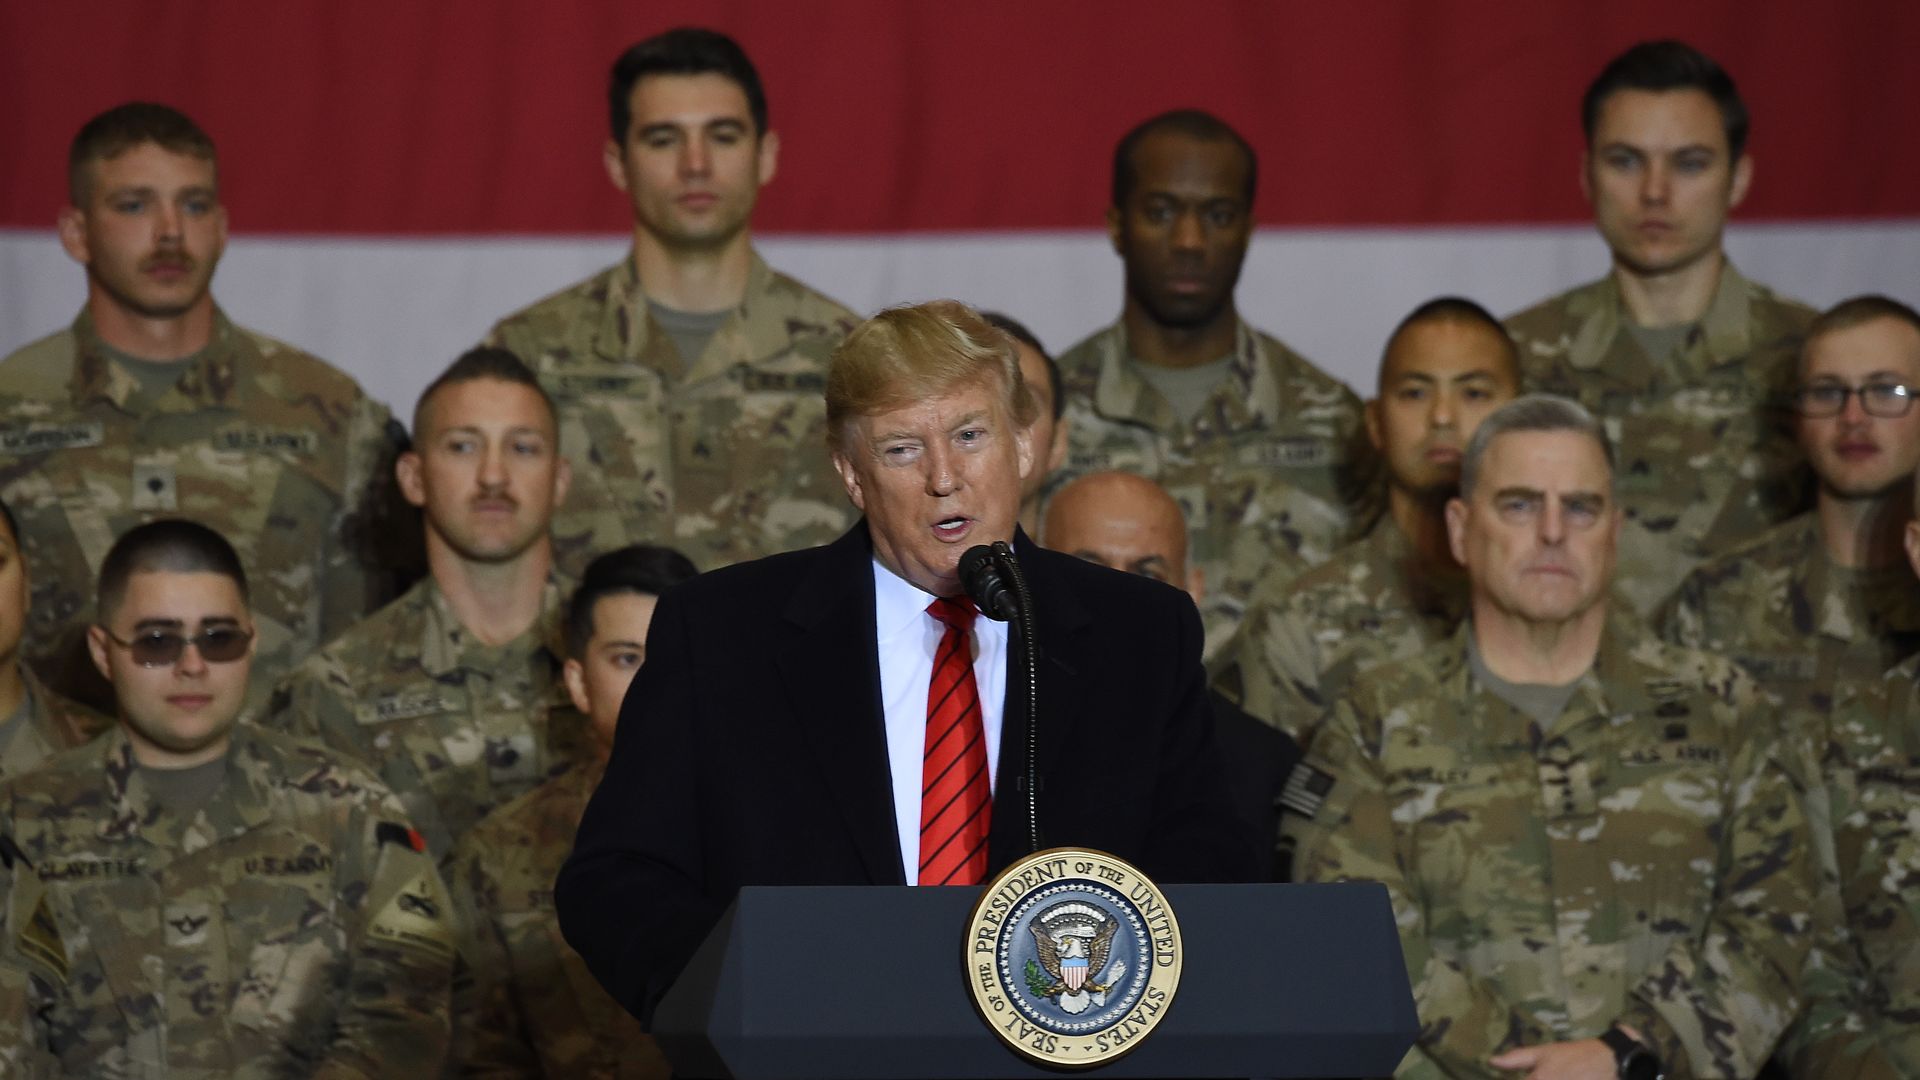 In this image, Trump stands in front of two rows of soldiers at a podium.